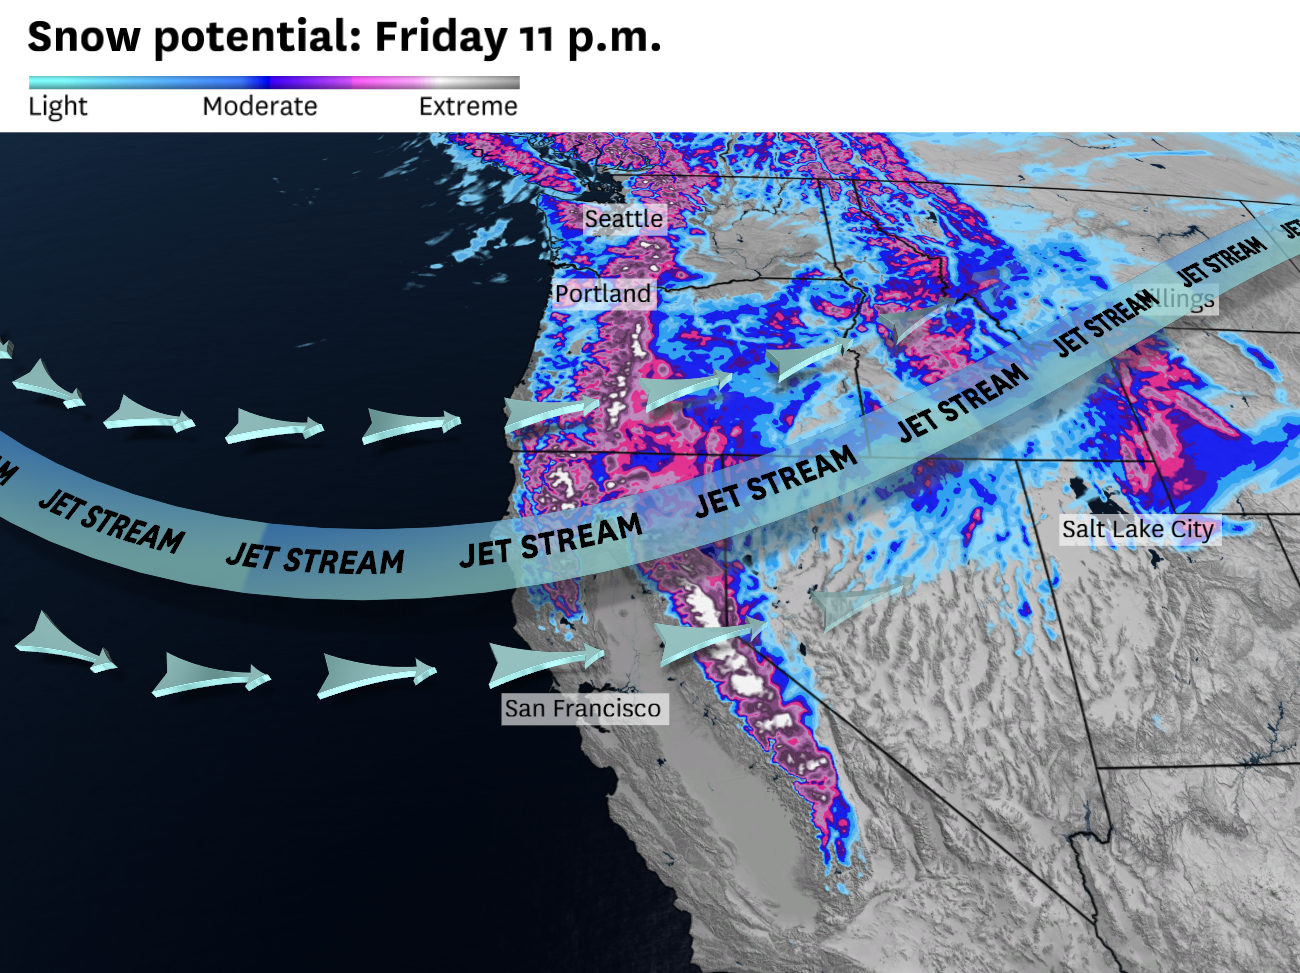 How the Arctic blizzard to bury Tahoe differs from previous storms